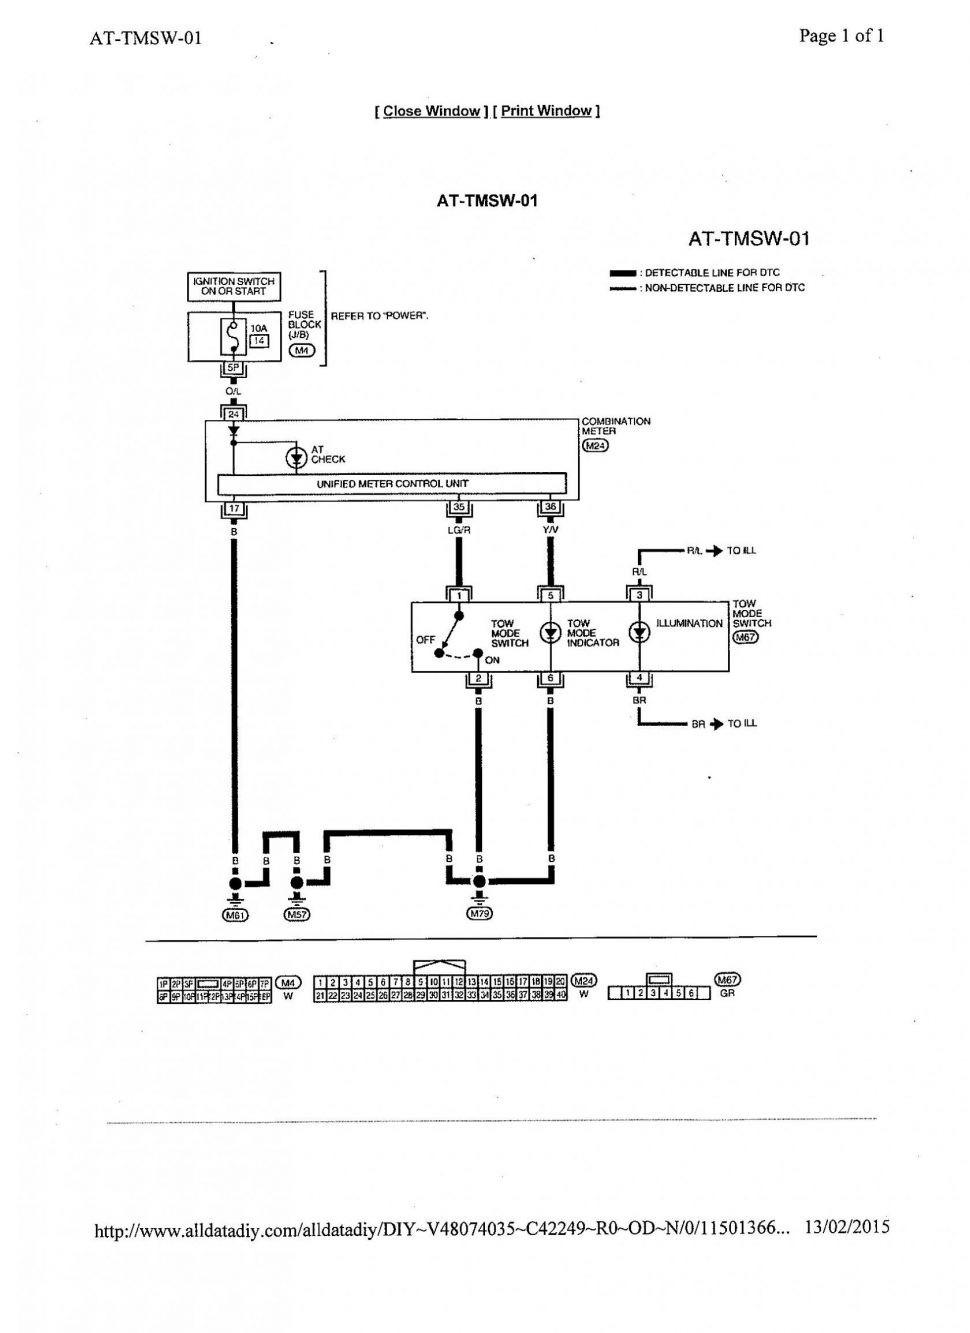 Electrical Wiring Repair Electrical Switch Wiring And Typical Diagram Wires Electrical System Spst Toggle Switch Wiring